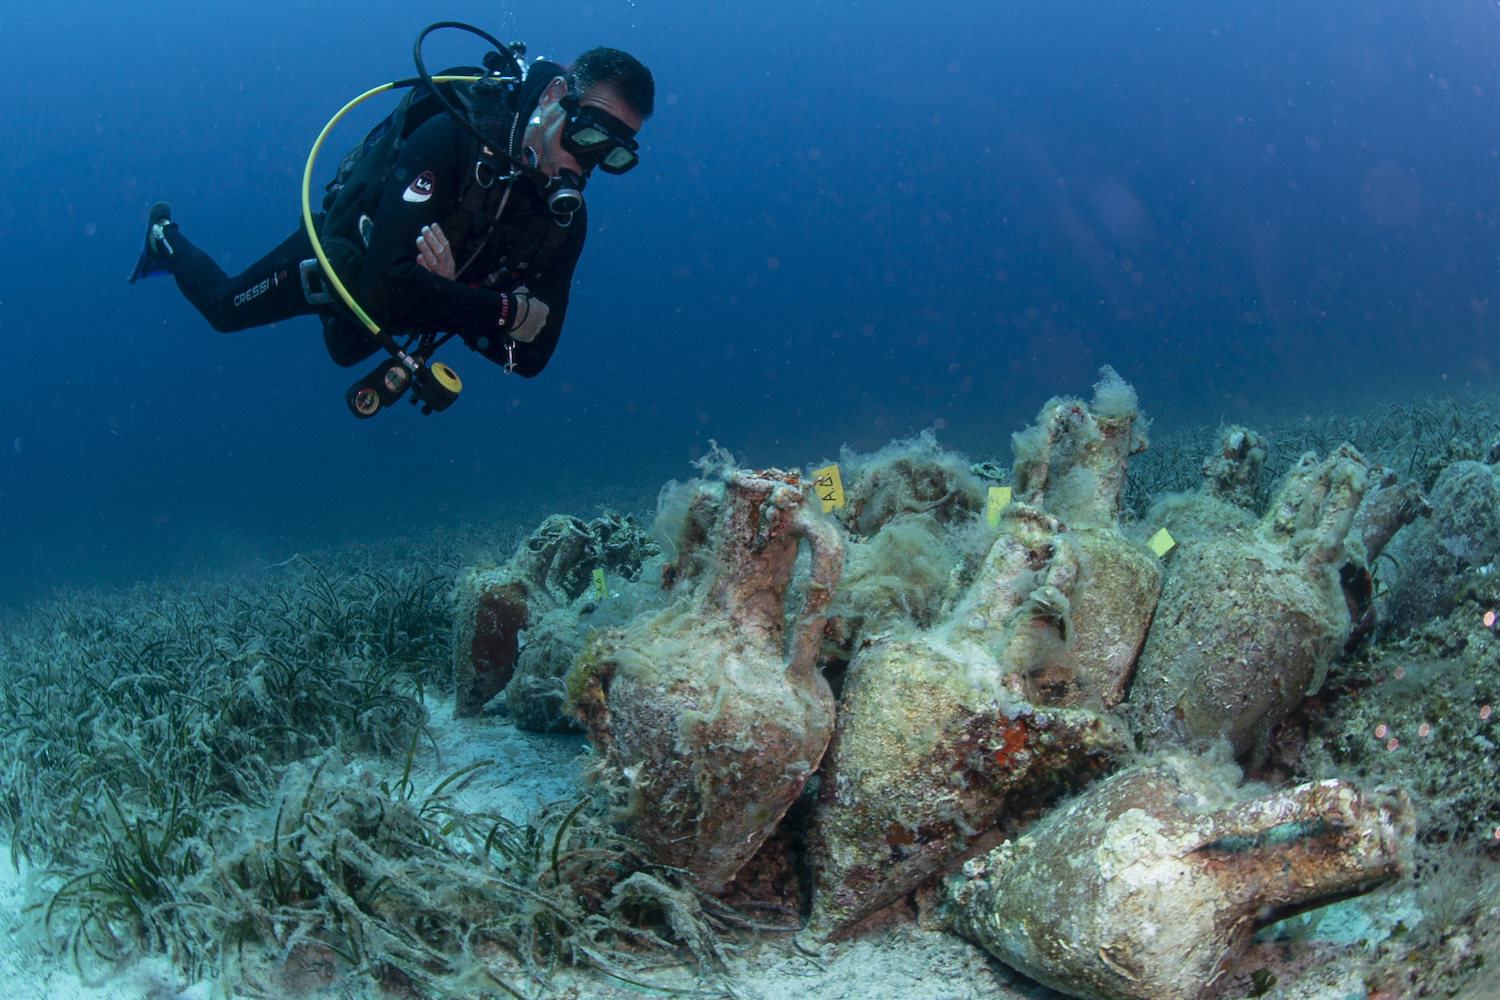 A person in a scuba suit hovers underwater above a cluster of large vases covered with algae and moss resting on the sea floor.